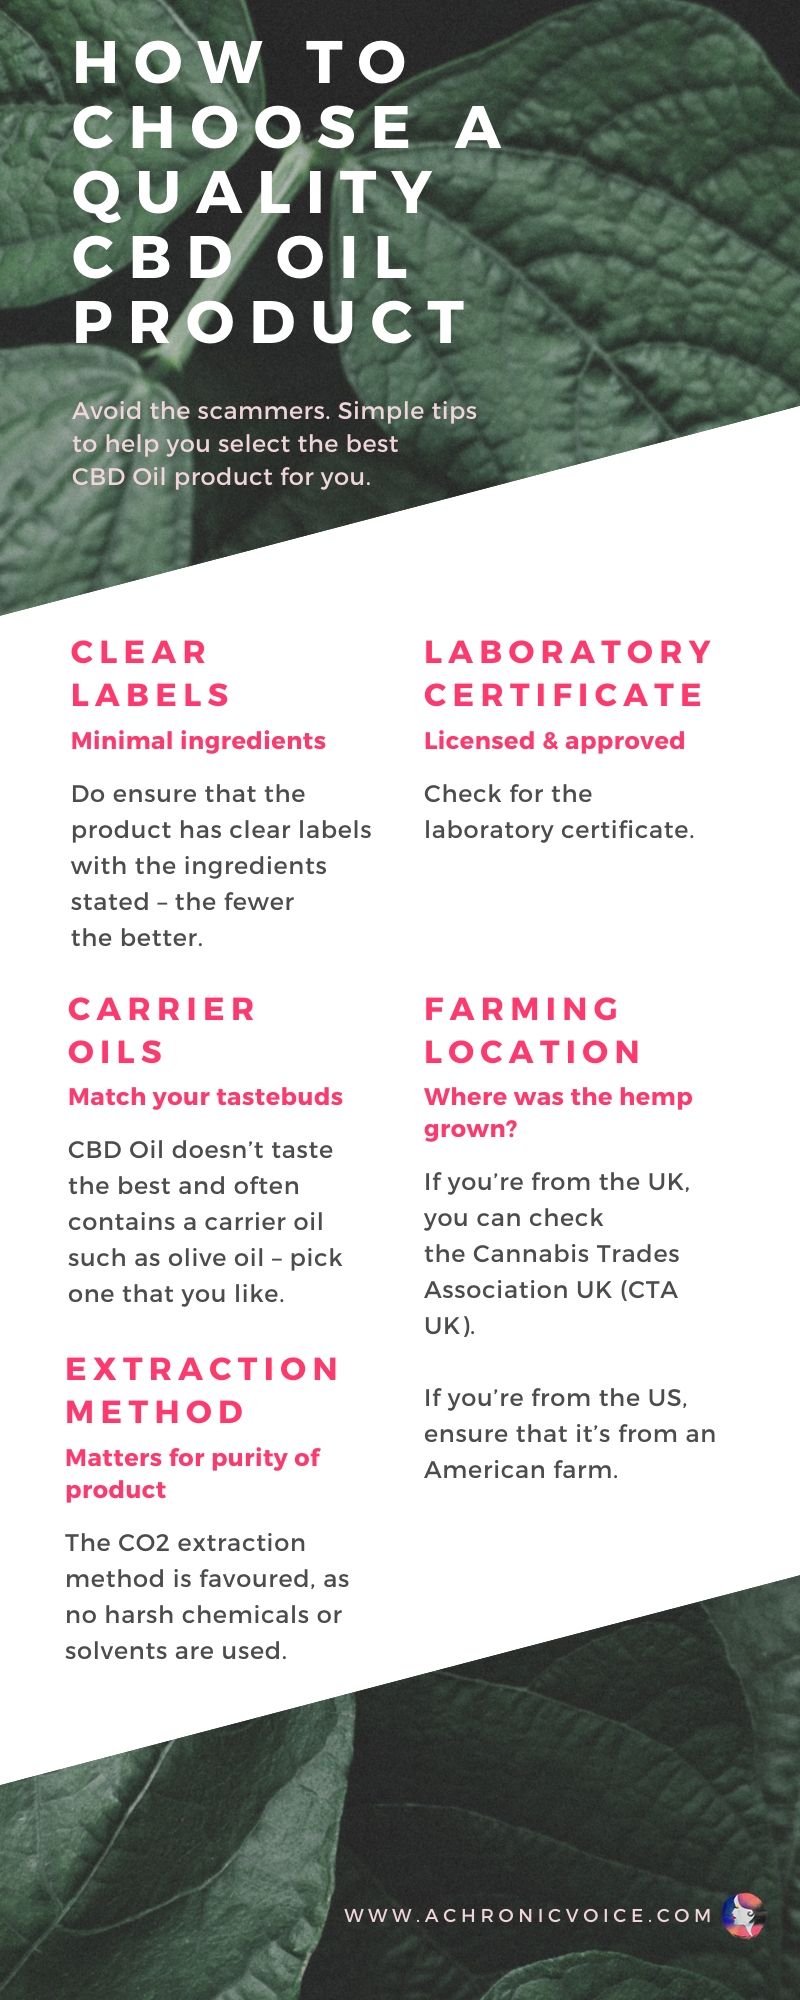 How to Choose a High Quality CBD Oil Product Infographic